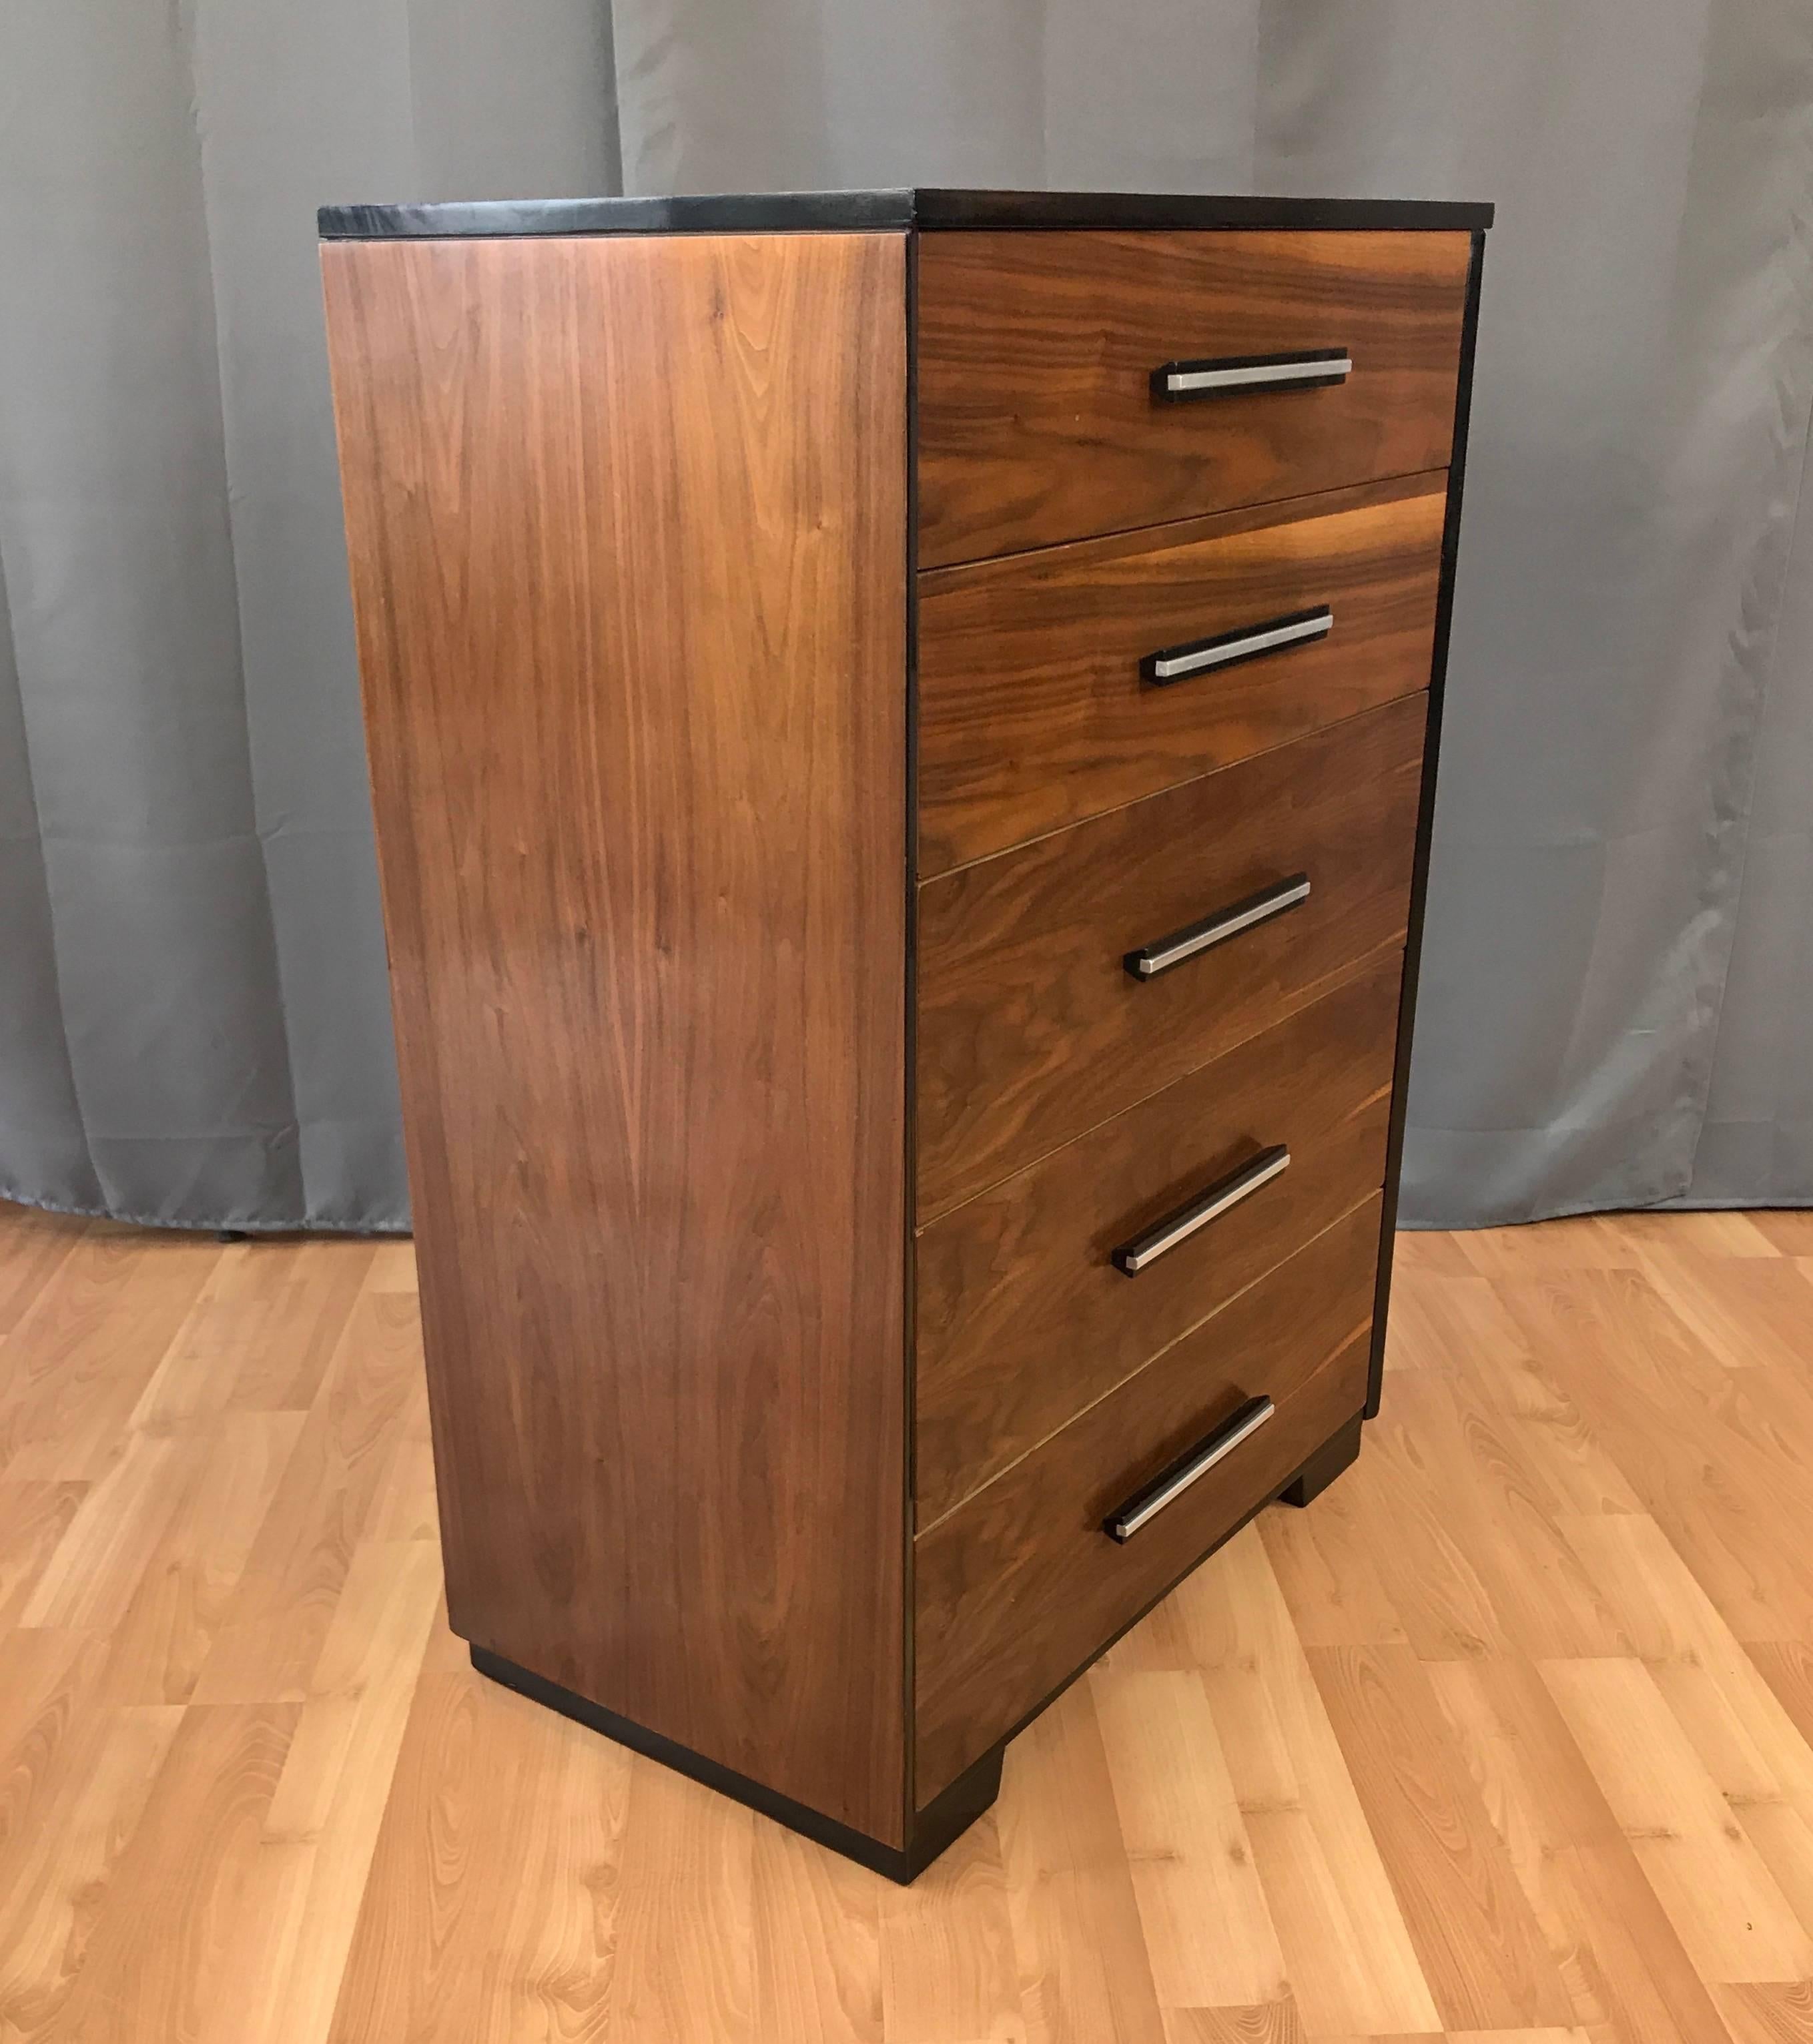 A midcentury walnut five-drawer highboy dresser designed by Raymond Loewy for Mengel Furniture.

Finished in very handsomely figured bookmatched walnut, with semi-gloss black lacquered trim that accents its clean, minimalist lines. Drawers feature